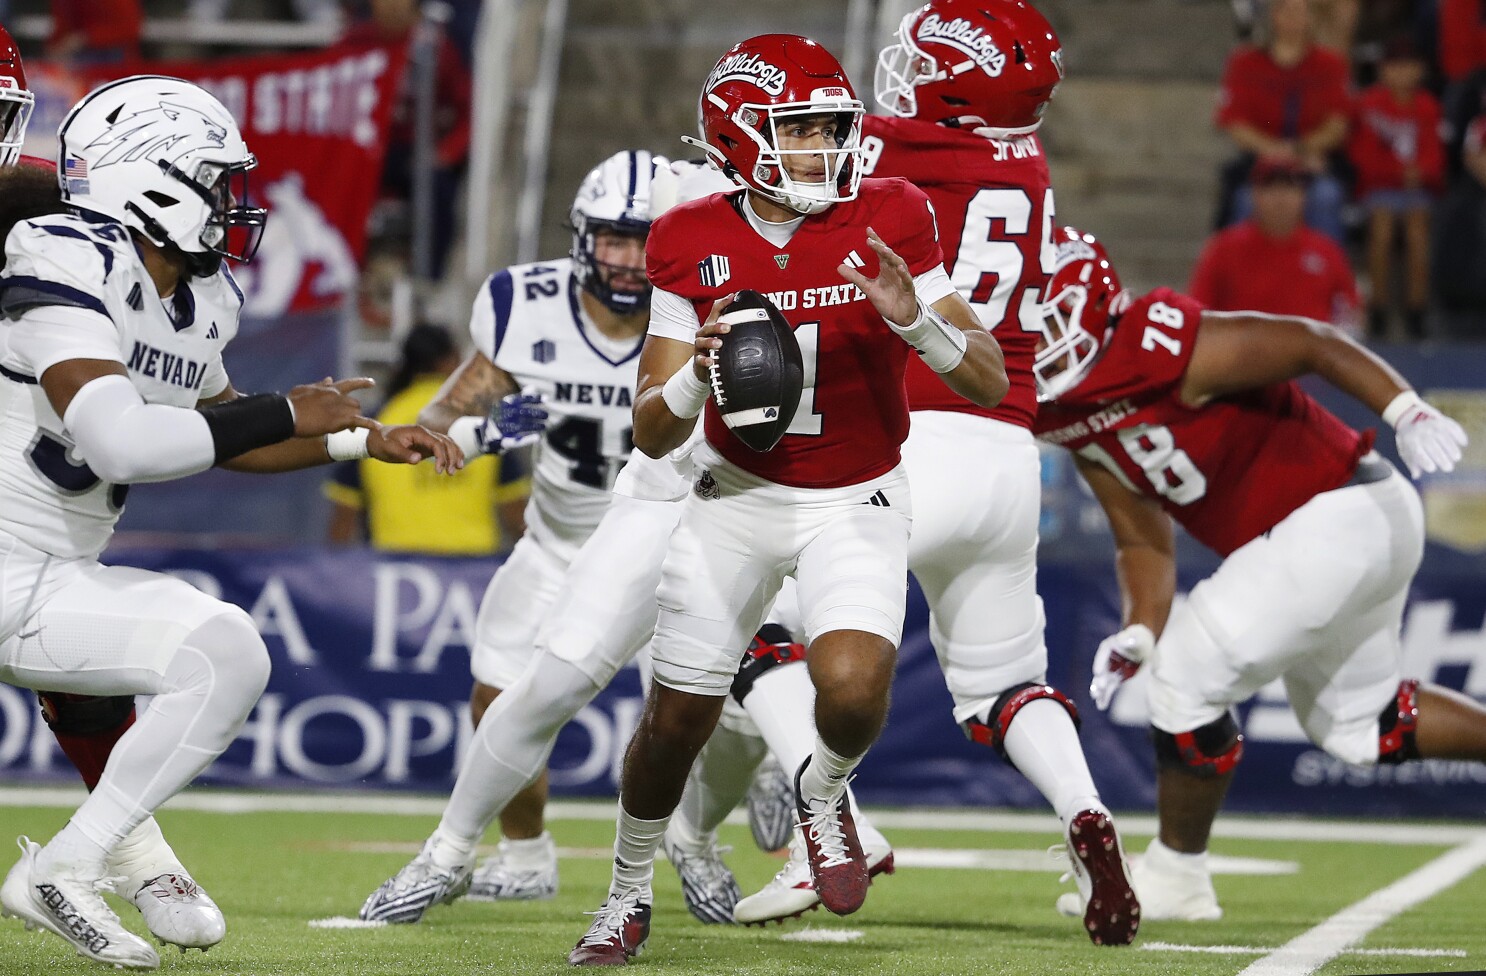 Keene throws 2 TDs, Fresno State forces 8 turnovers in 29-0 win